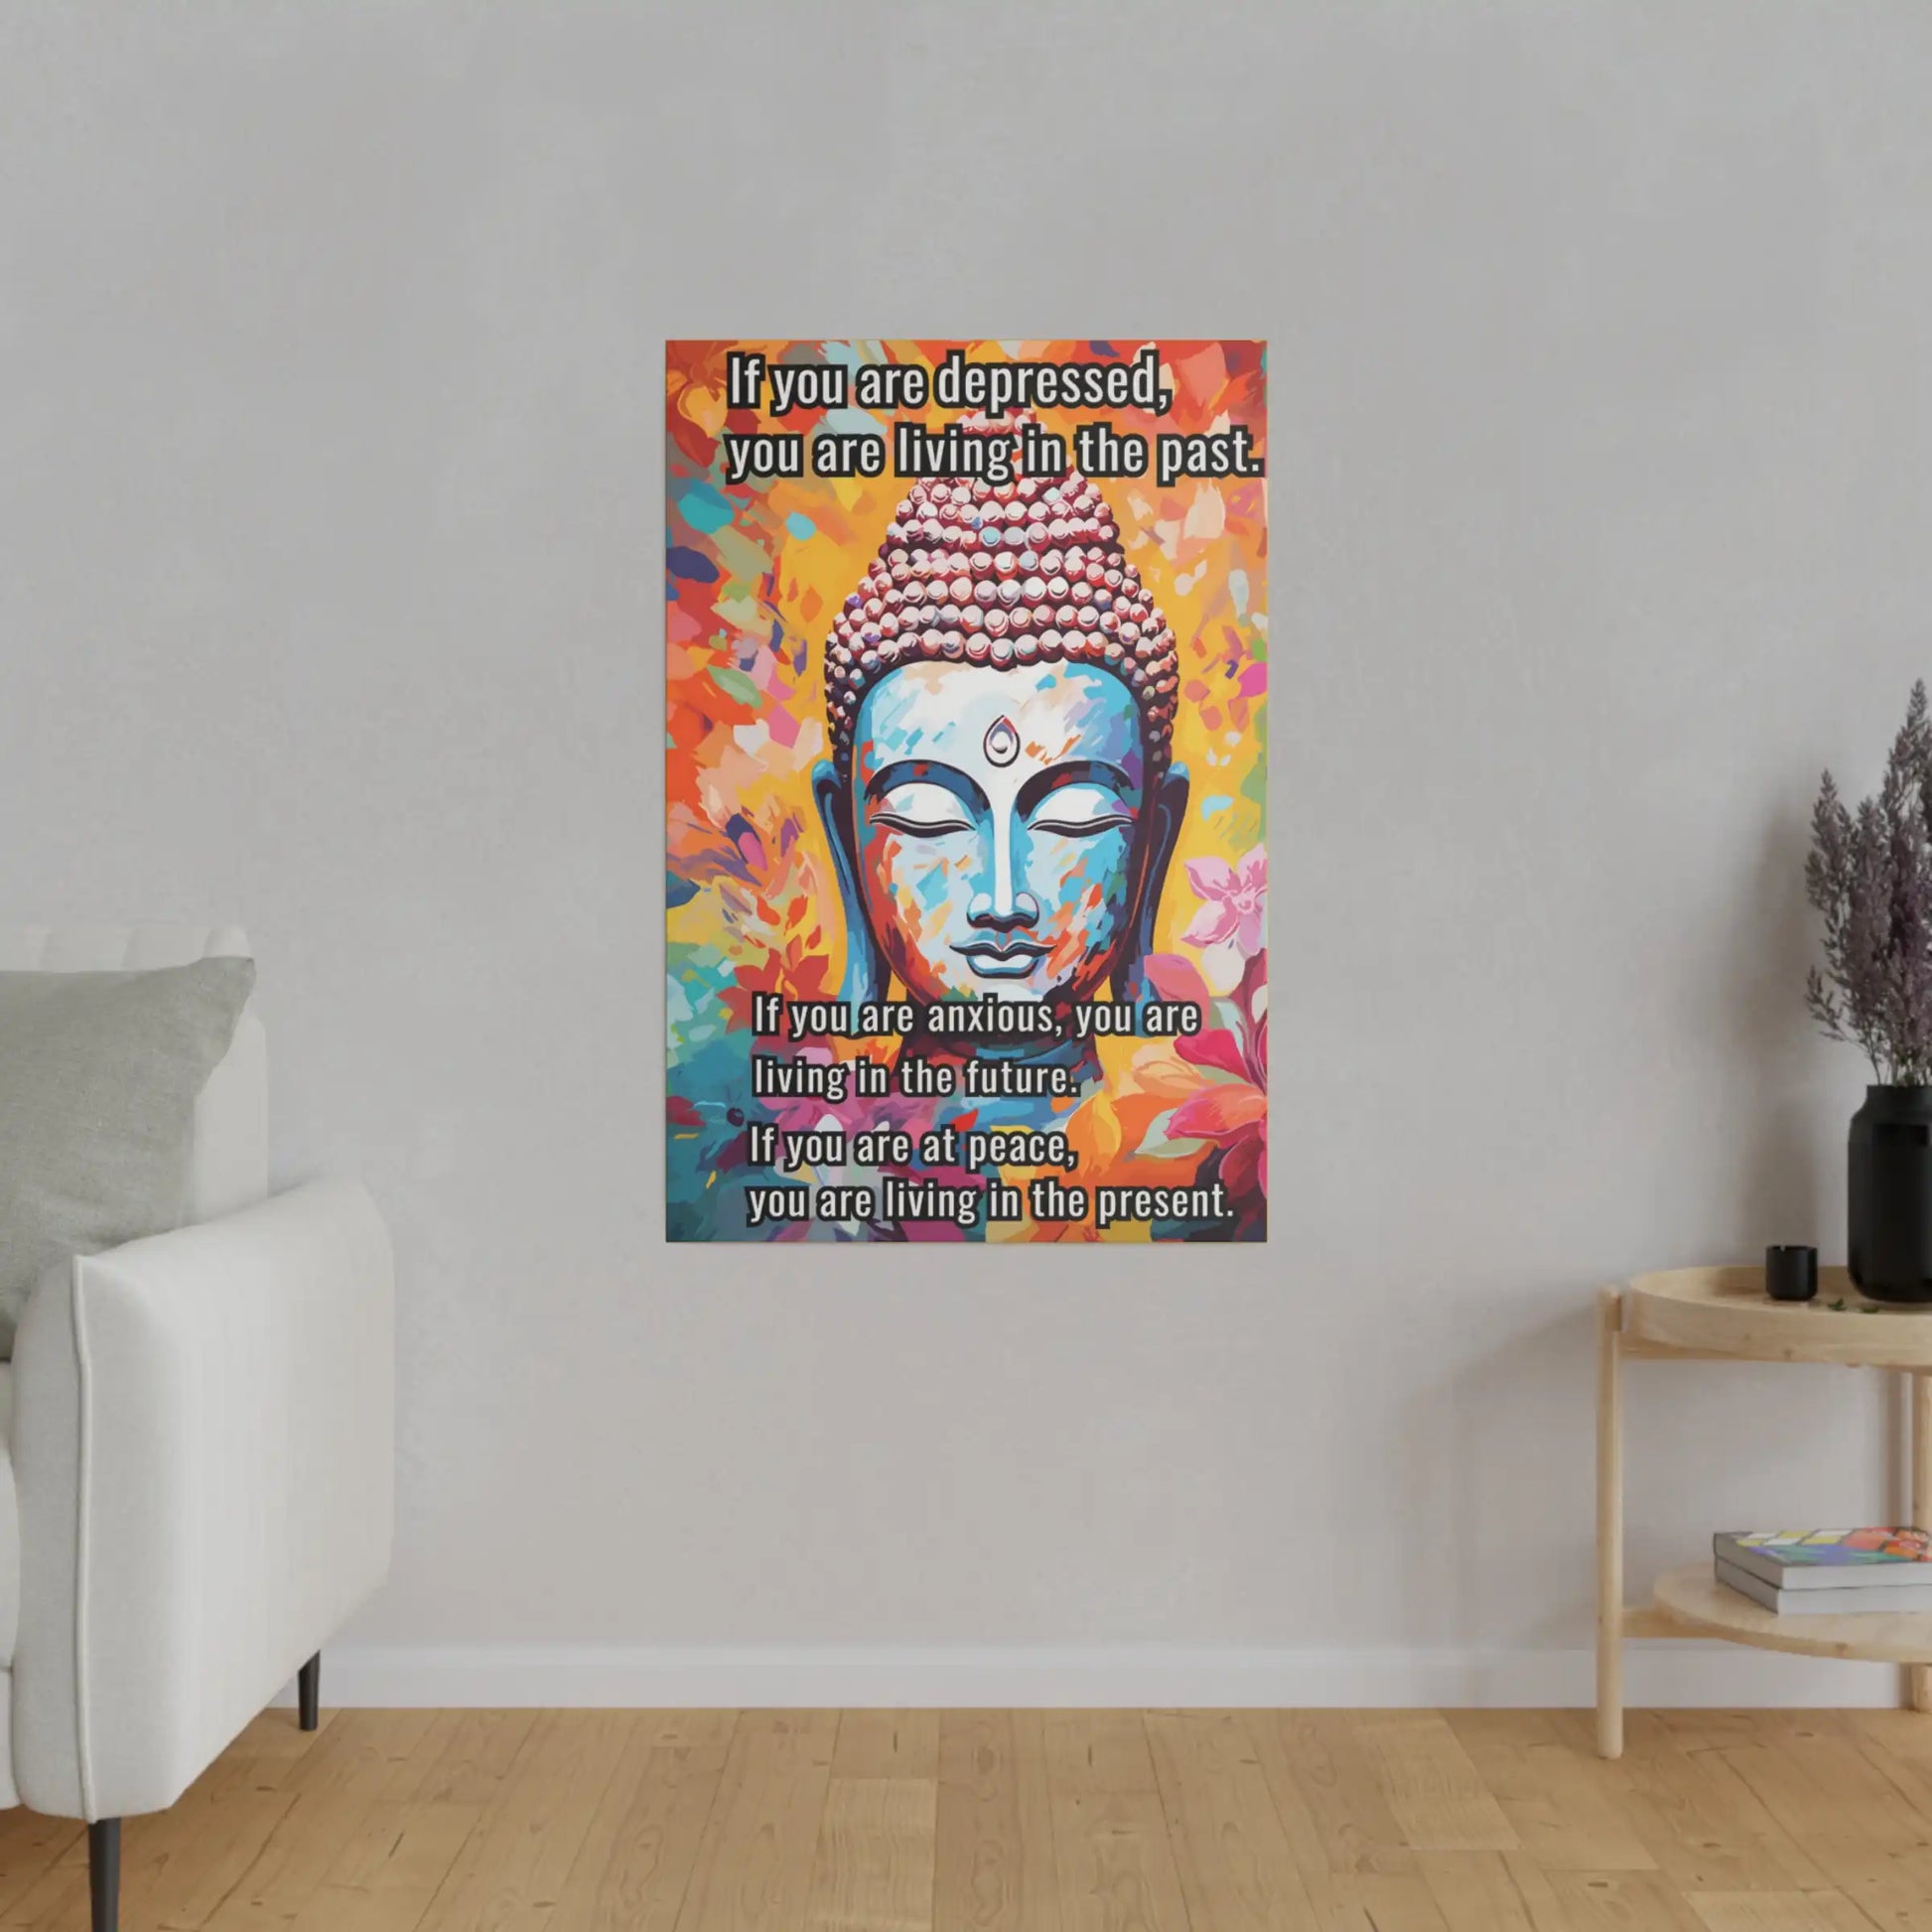 BUDDHA WALL CANVAS ART WITH INSPIRATIONAL QUOTE - 24’ x